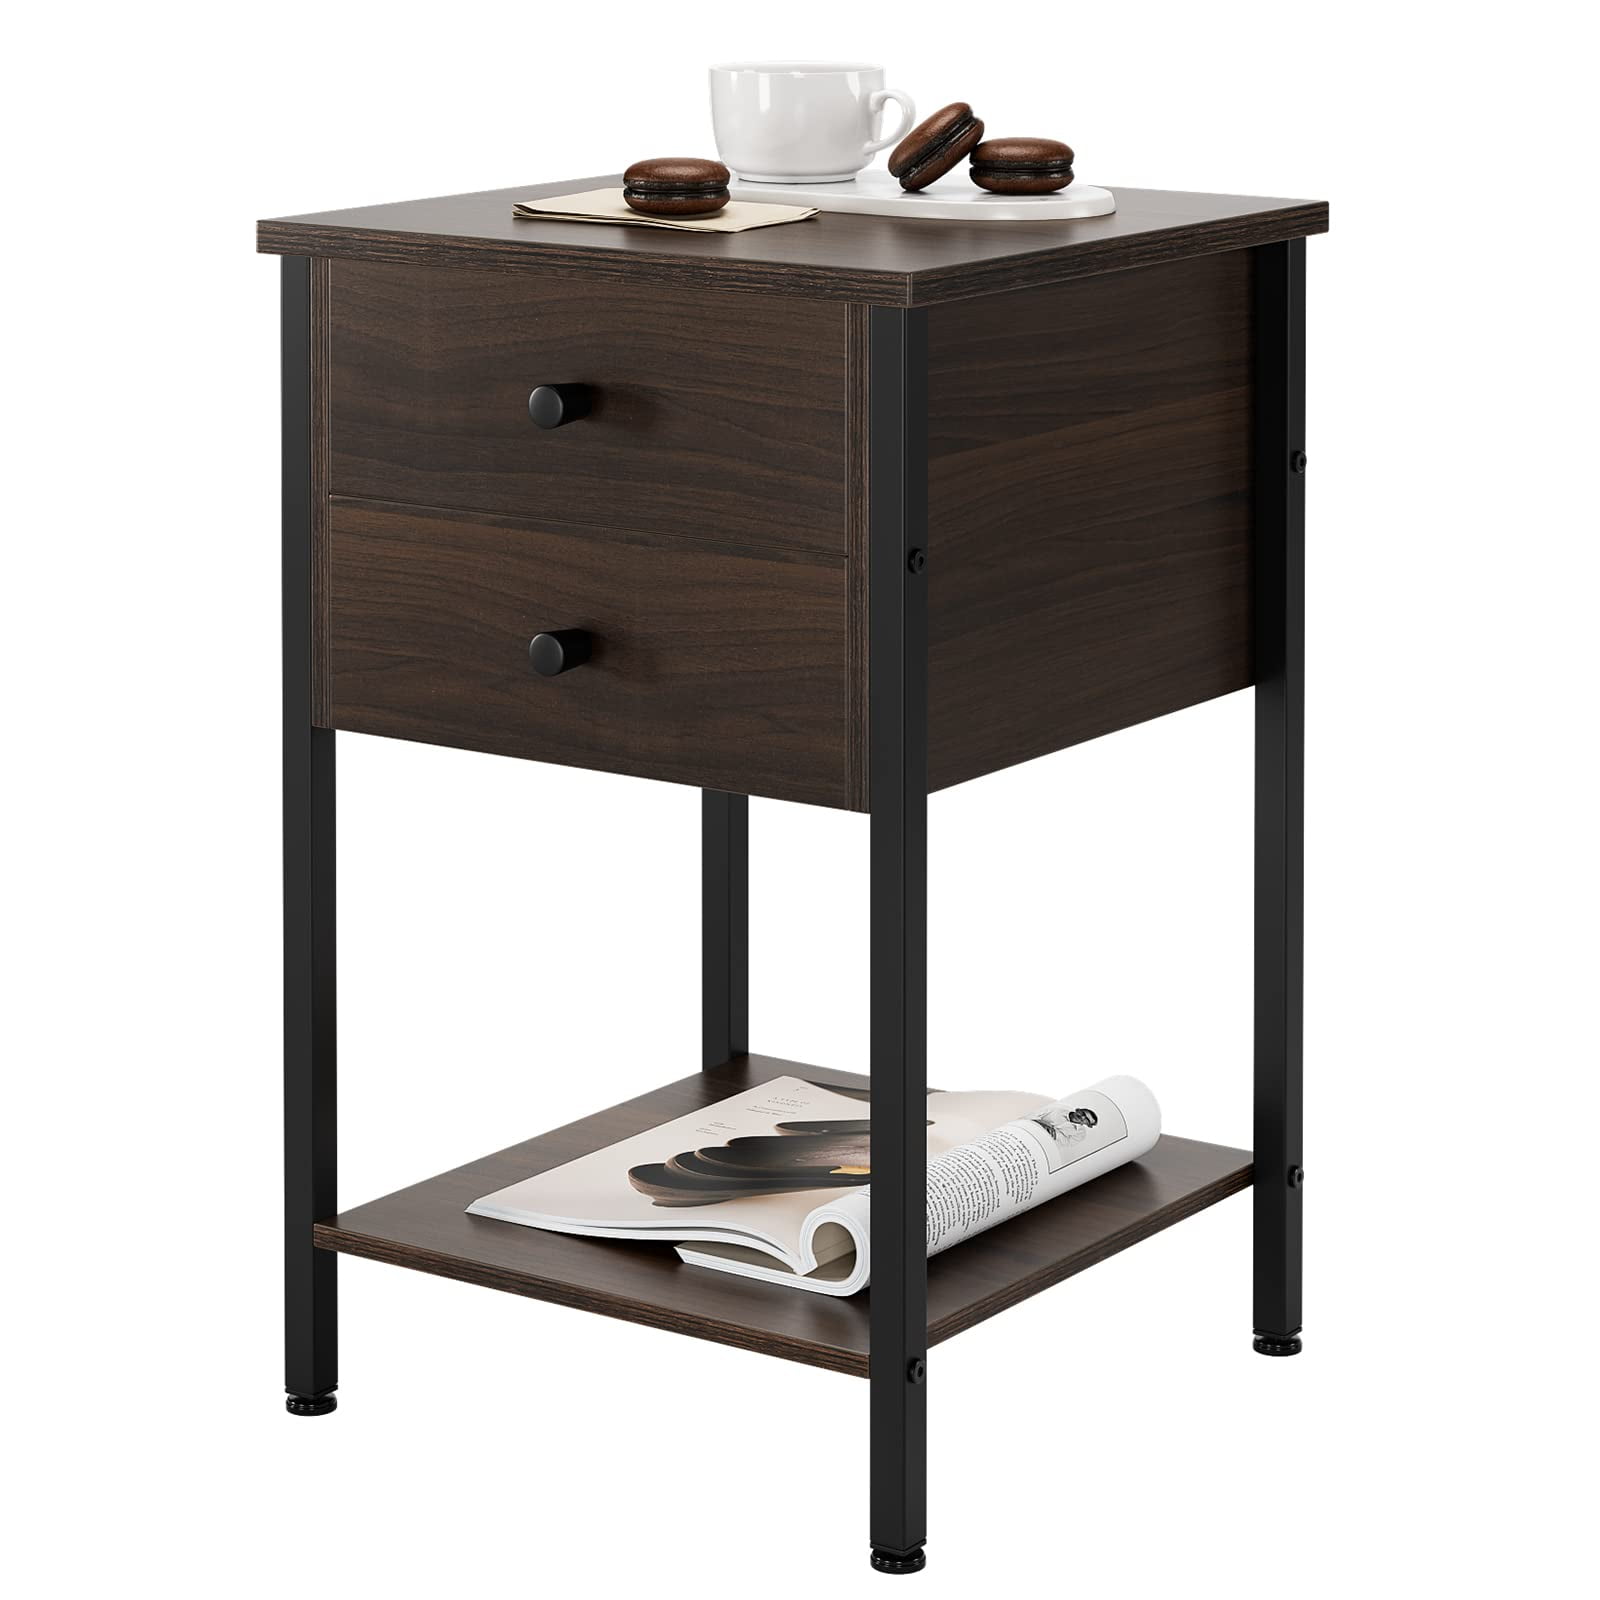 Nightstand with 2 Drawers, Wood Side Table for Bedroom, Living Room